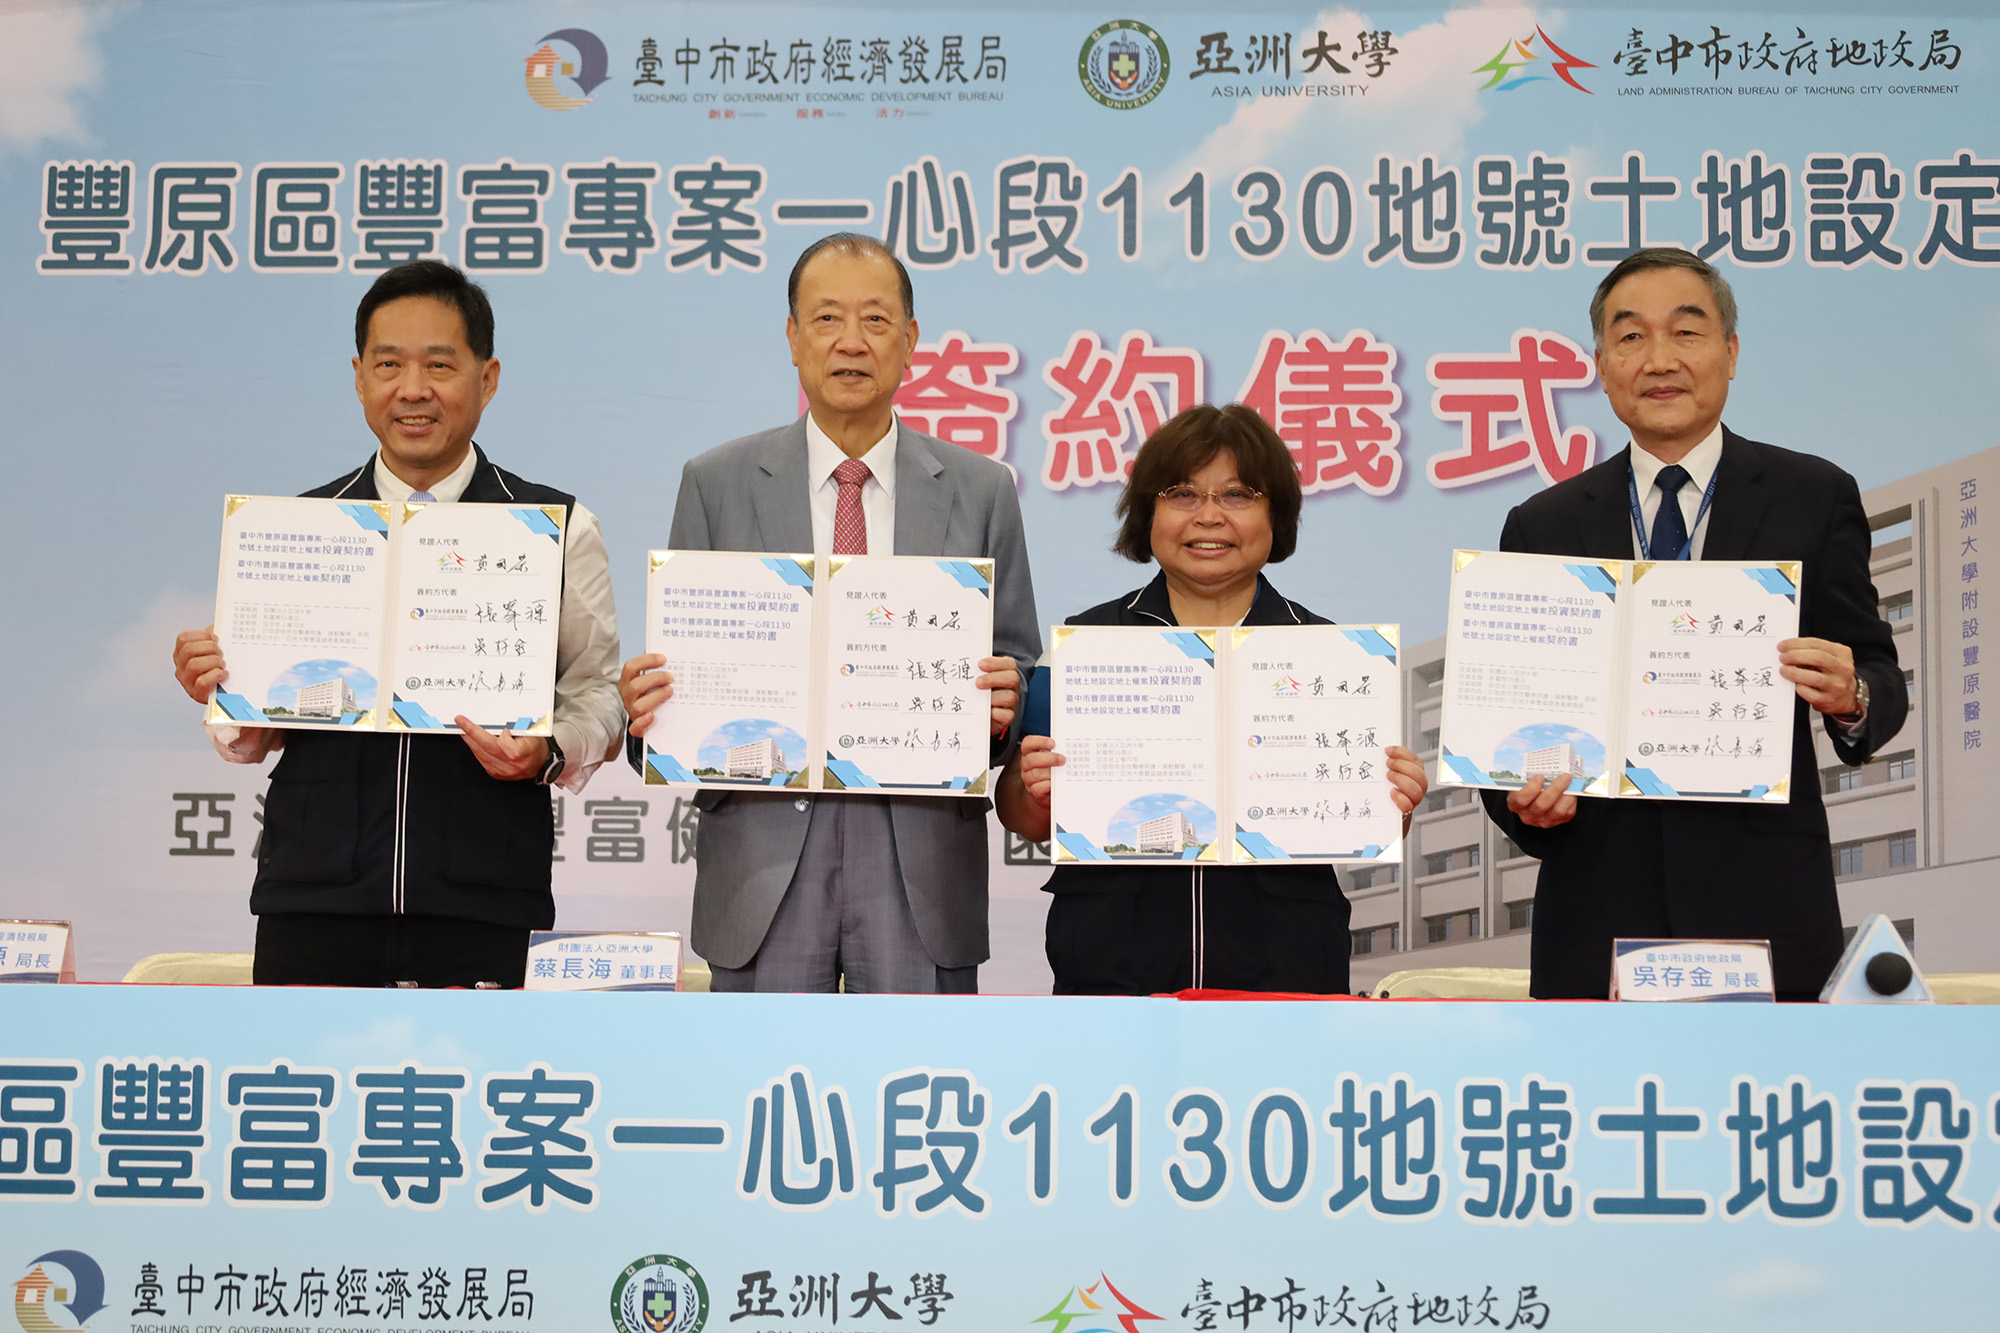 (From right to left) Deputy Mayor Guo-Rong Huang of Taichung City Government, Director-General Cun-Jin Wu of the Land Administration Bureau, Chairman Chang-Hai Tsai of Asia University, and Director Feng-Yuan Chang of the Bureau of Economic Development, have completed the signing of the "Fengfu Project."